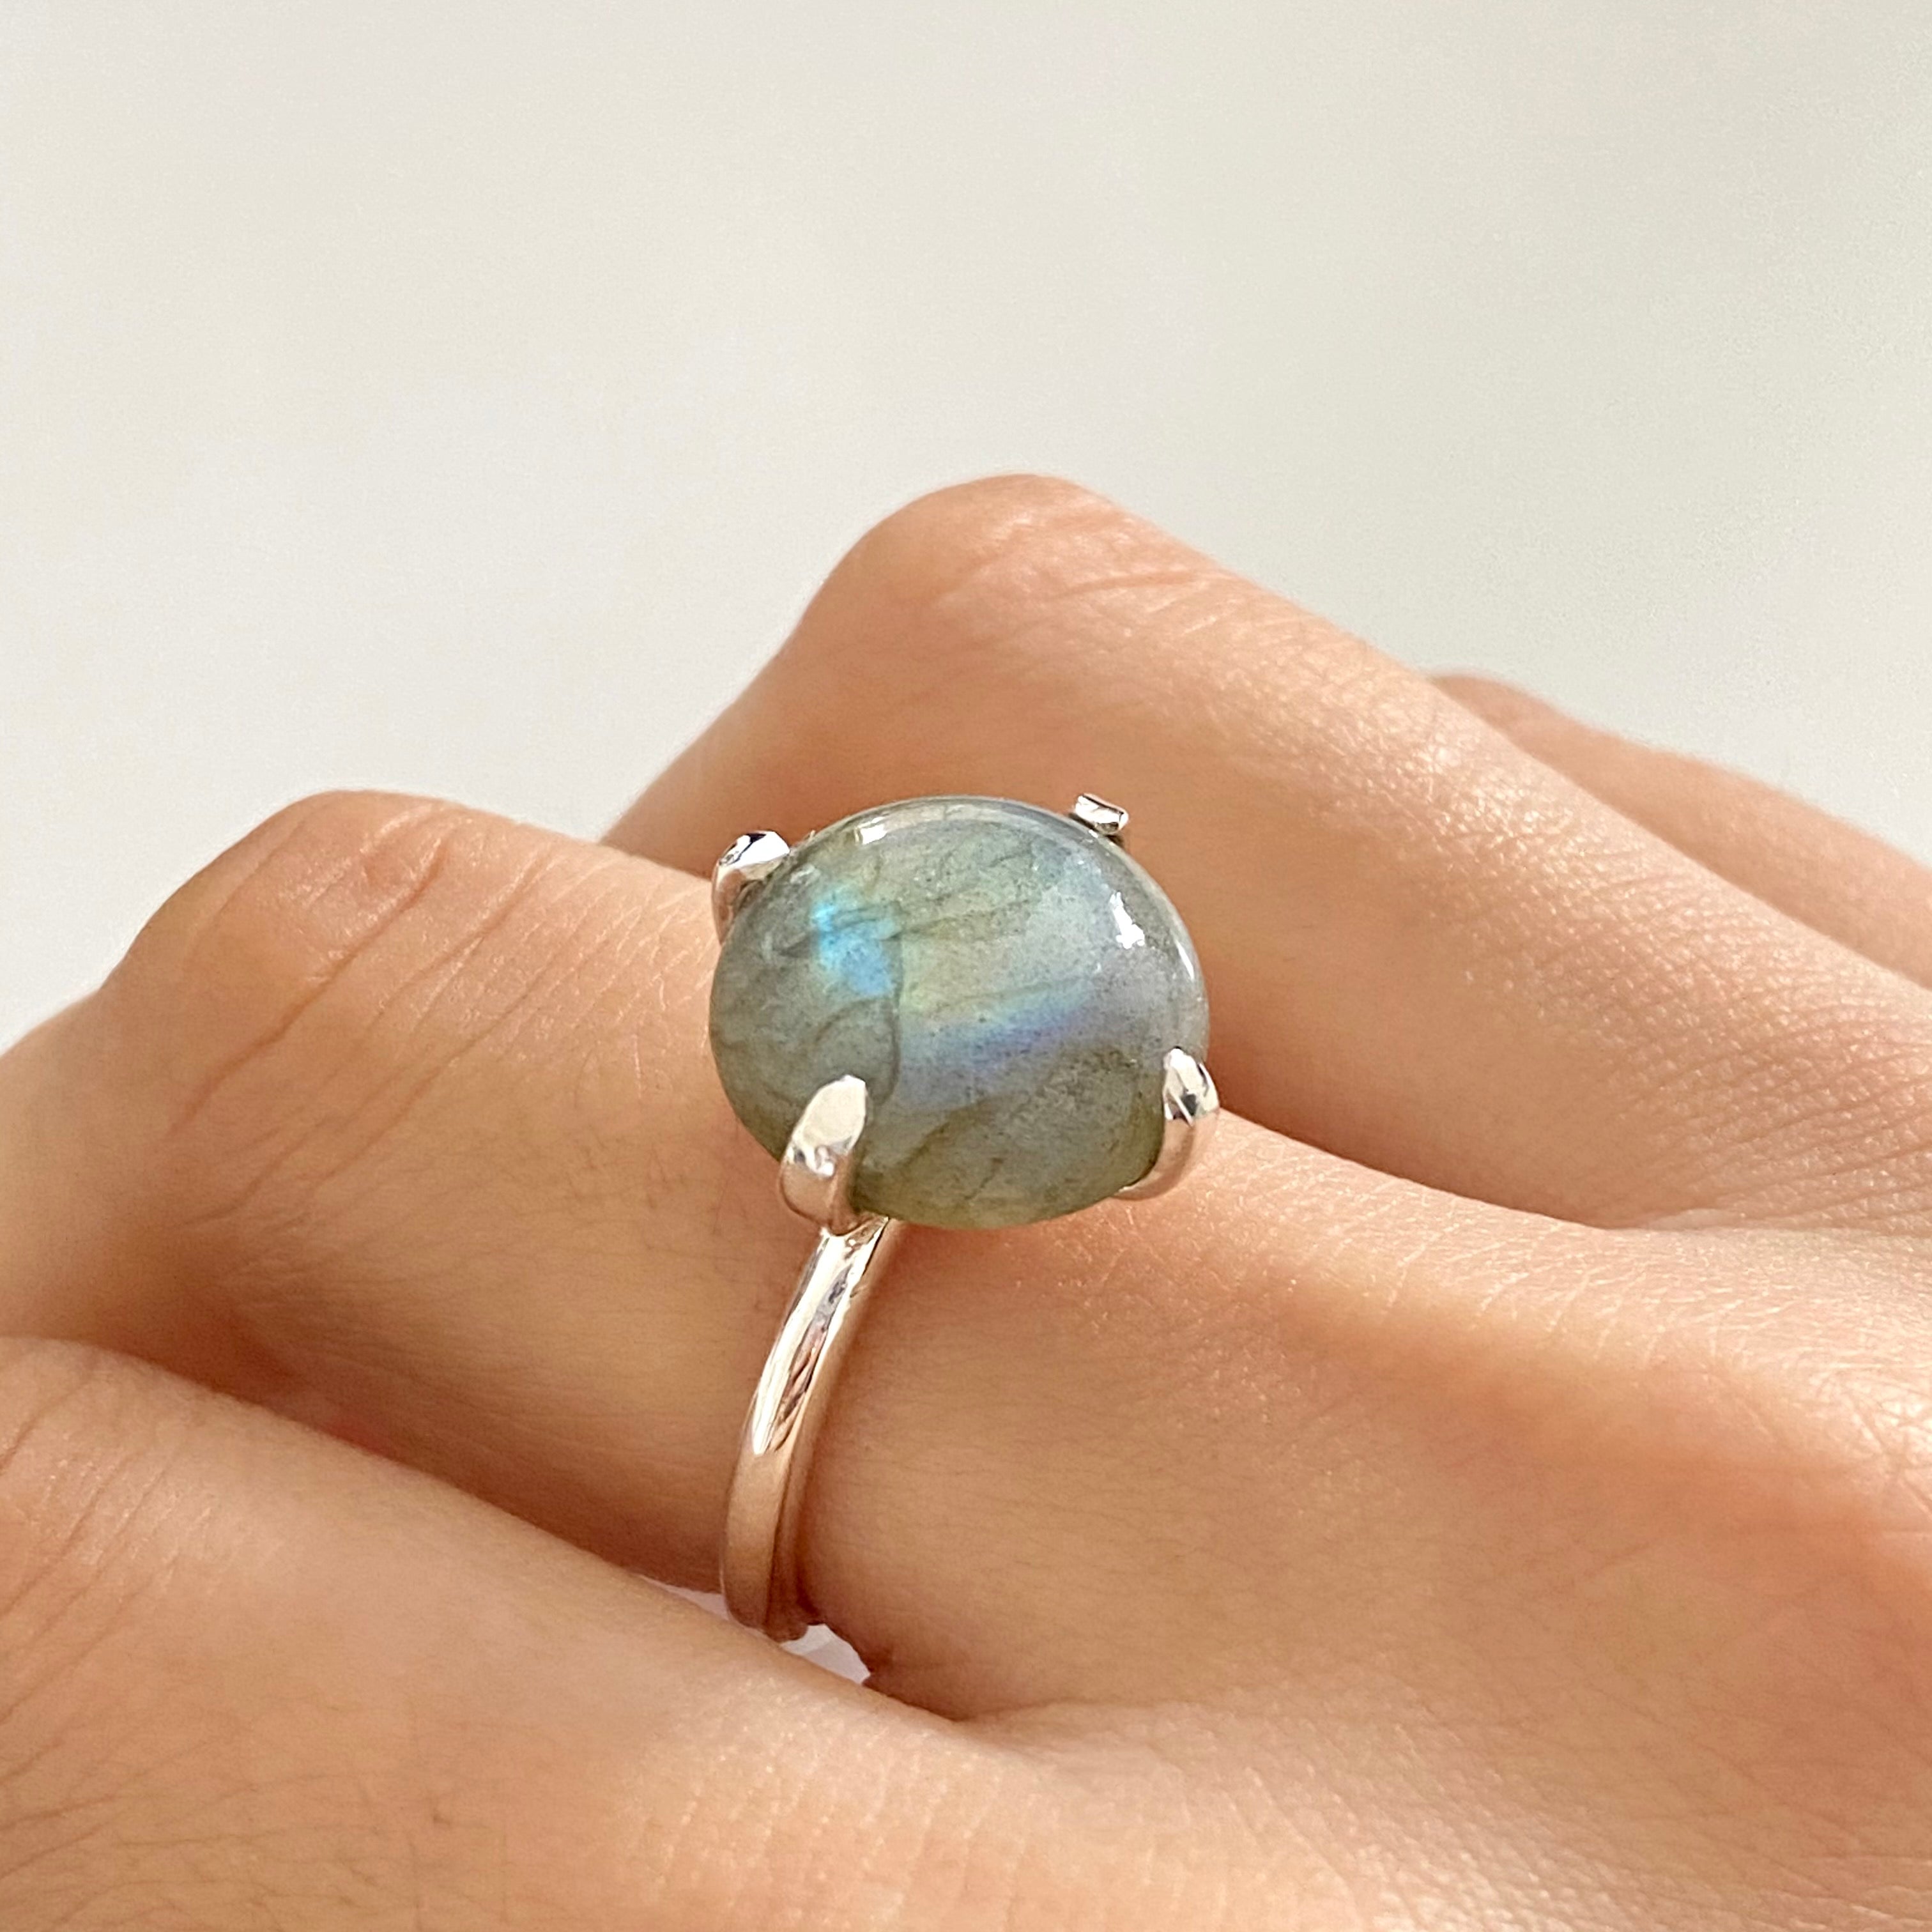 Round Cabochon Labradorite Ring in Sterling Silver